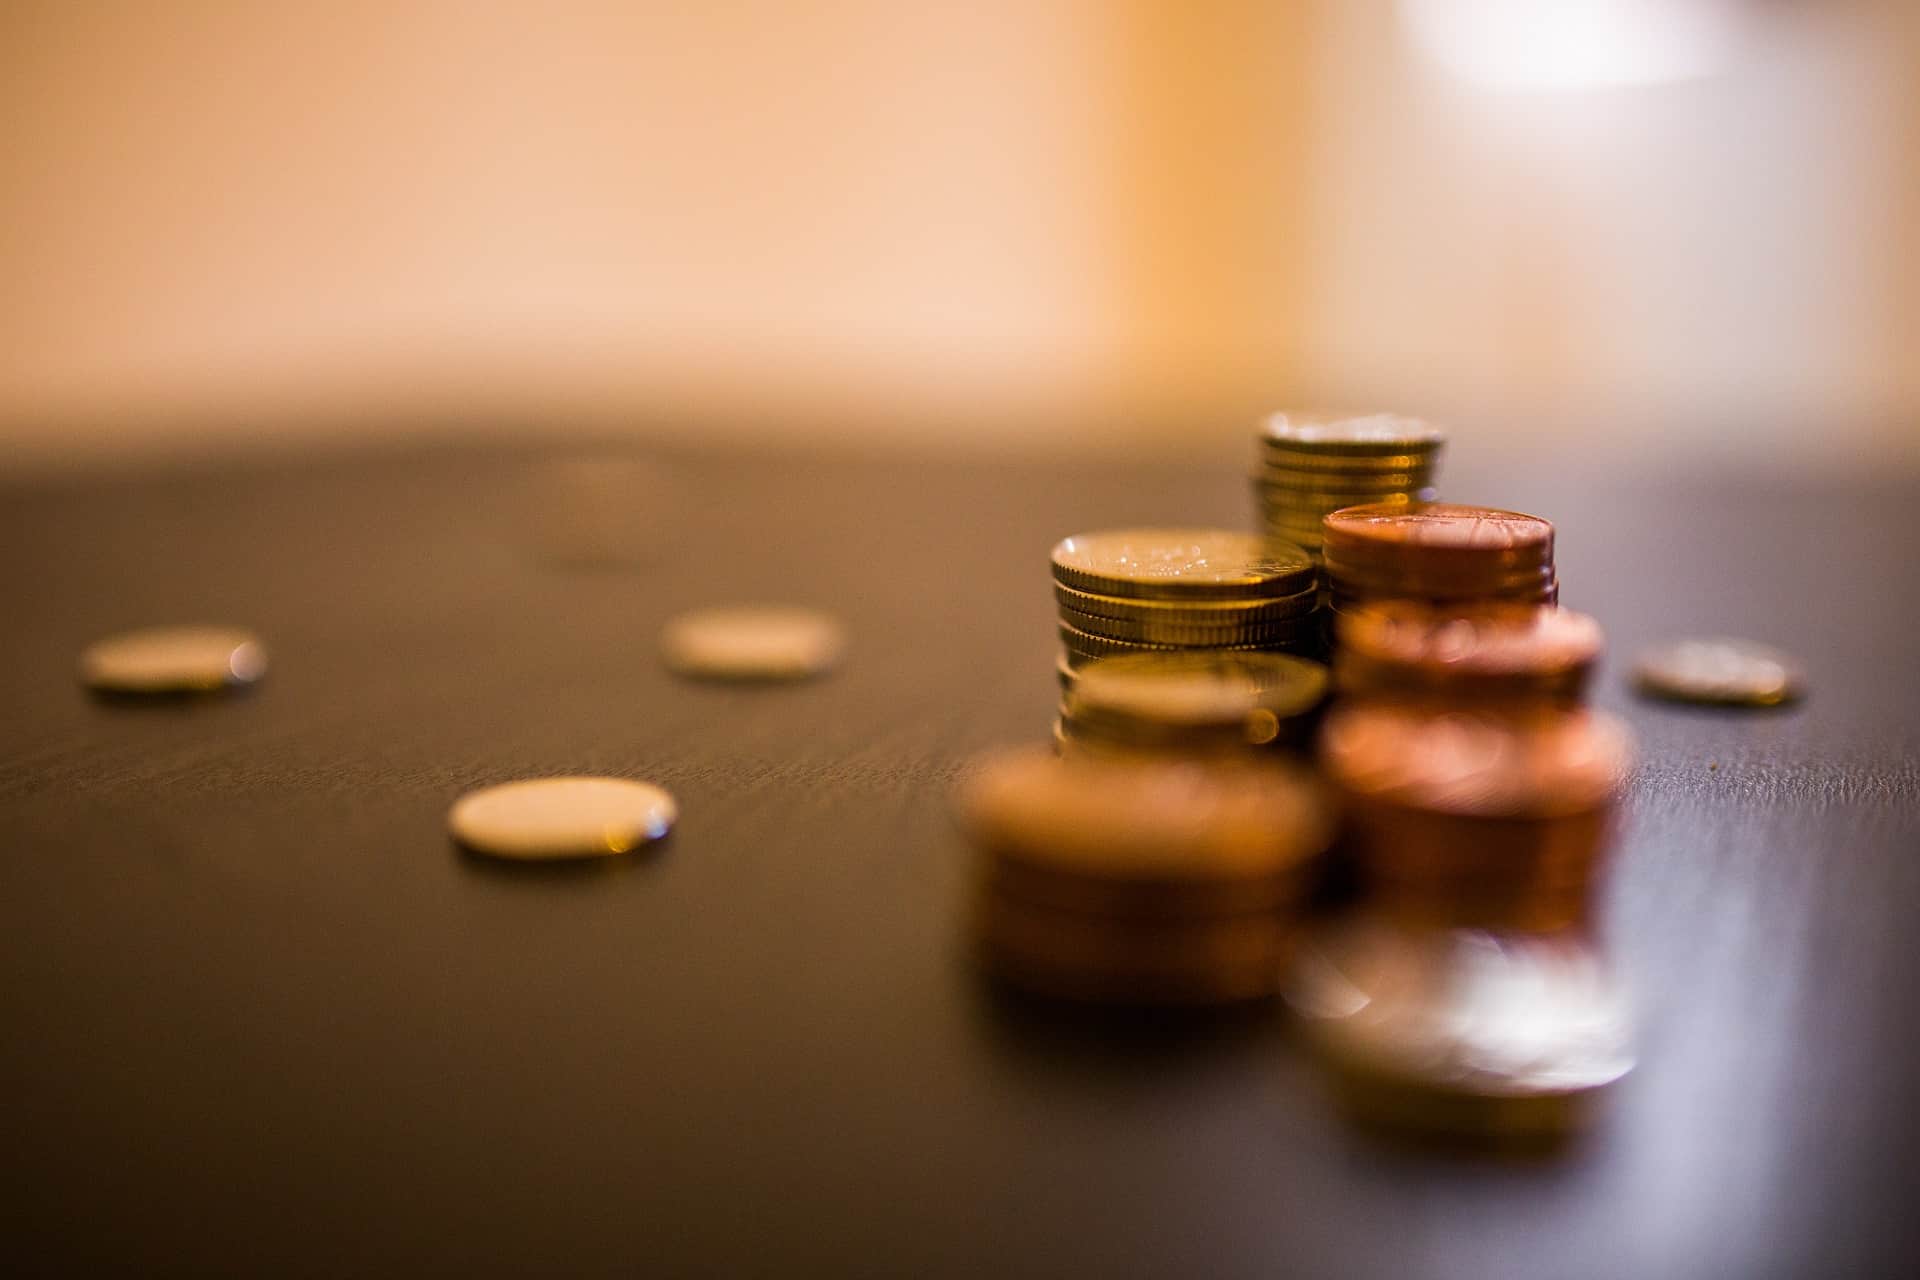 Stacks and scattered coins on a surface, with a shallow depth of field emphasizing the nearest stack.